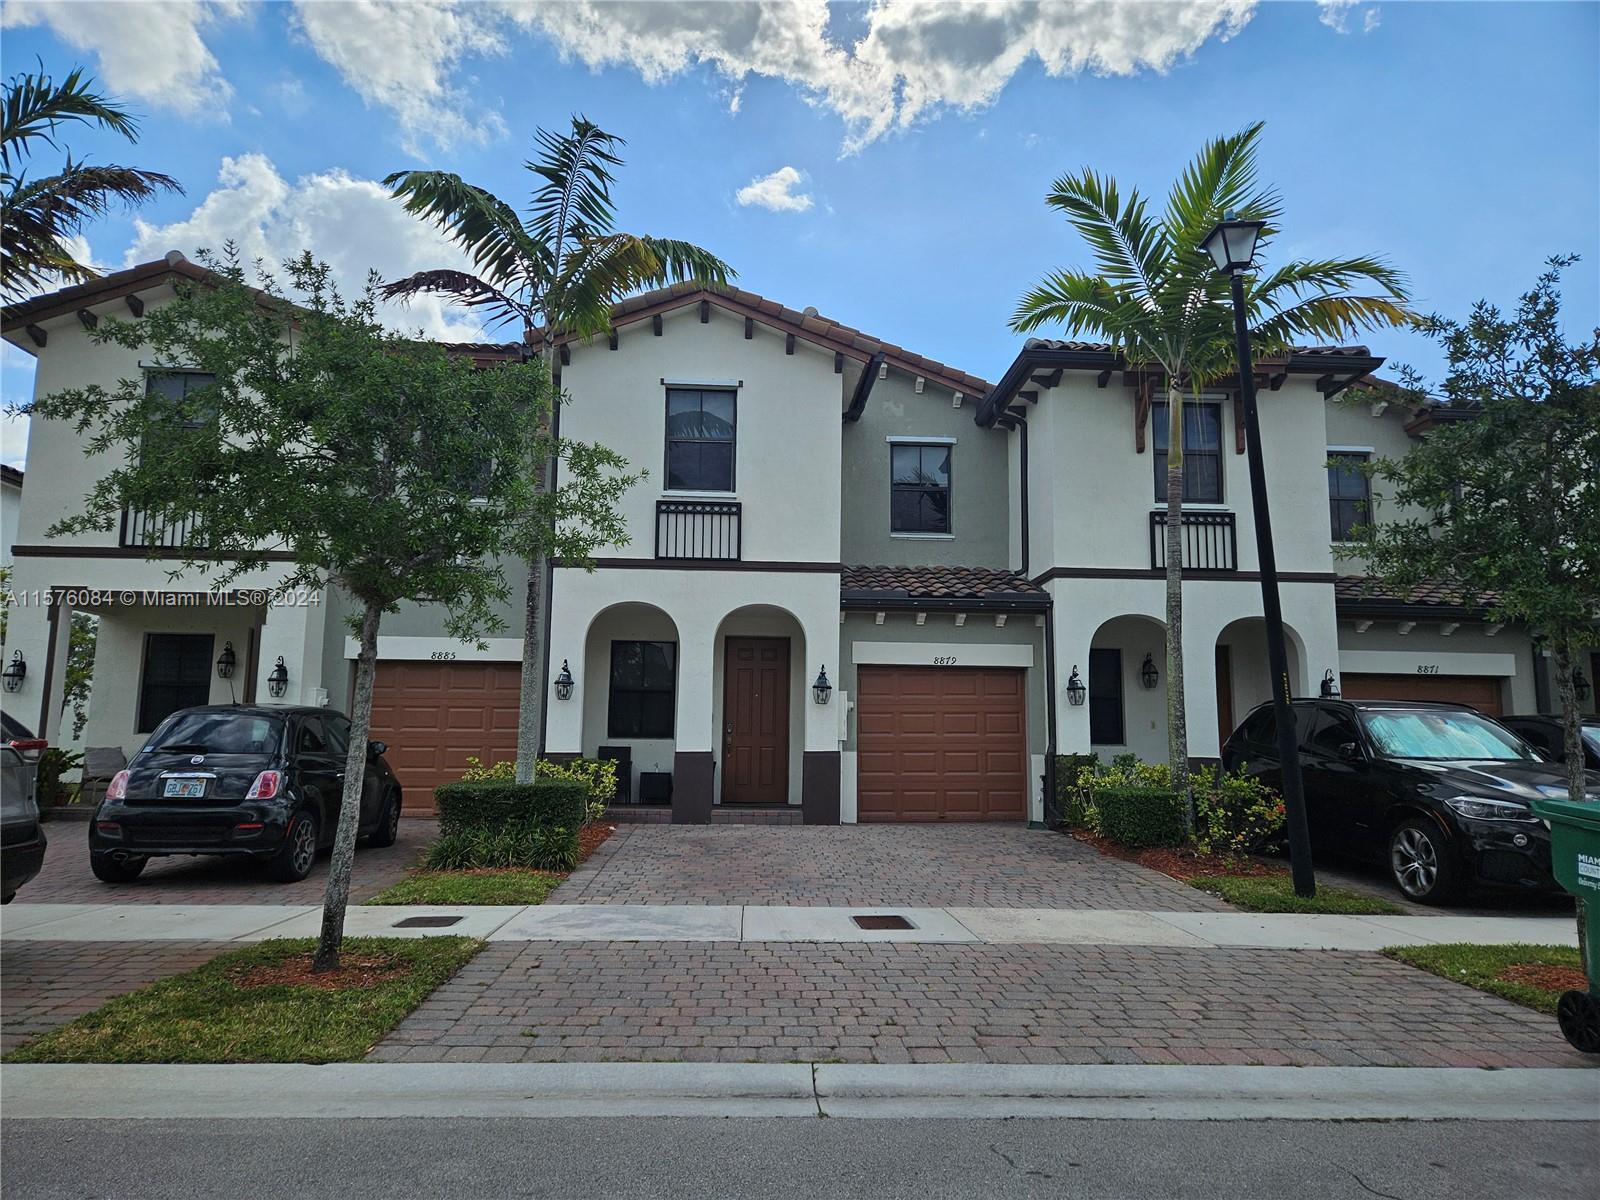 8879 NW 102nd Ct, Doral, Florida 33178, 3 Bedrooms Bedrooms, ,2 BathroomsBathrooms,Residentiallease,For Rent,8879 NW 102nd Ct,A11576084